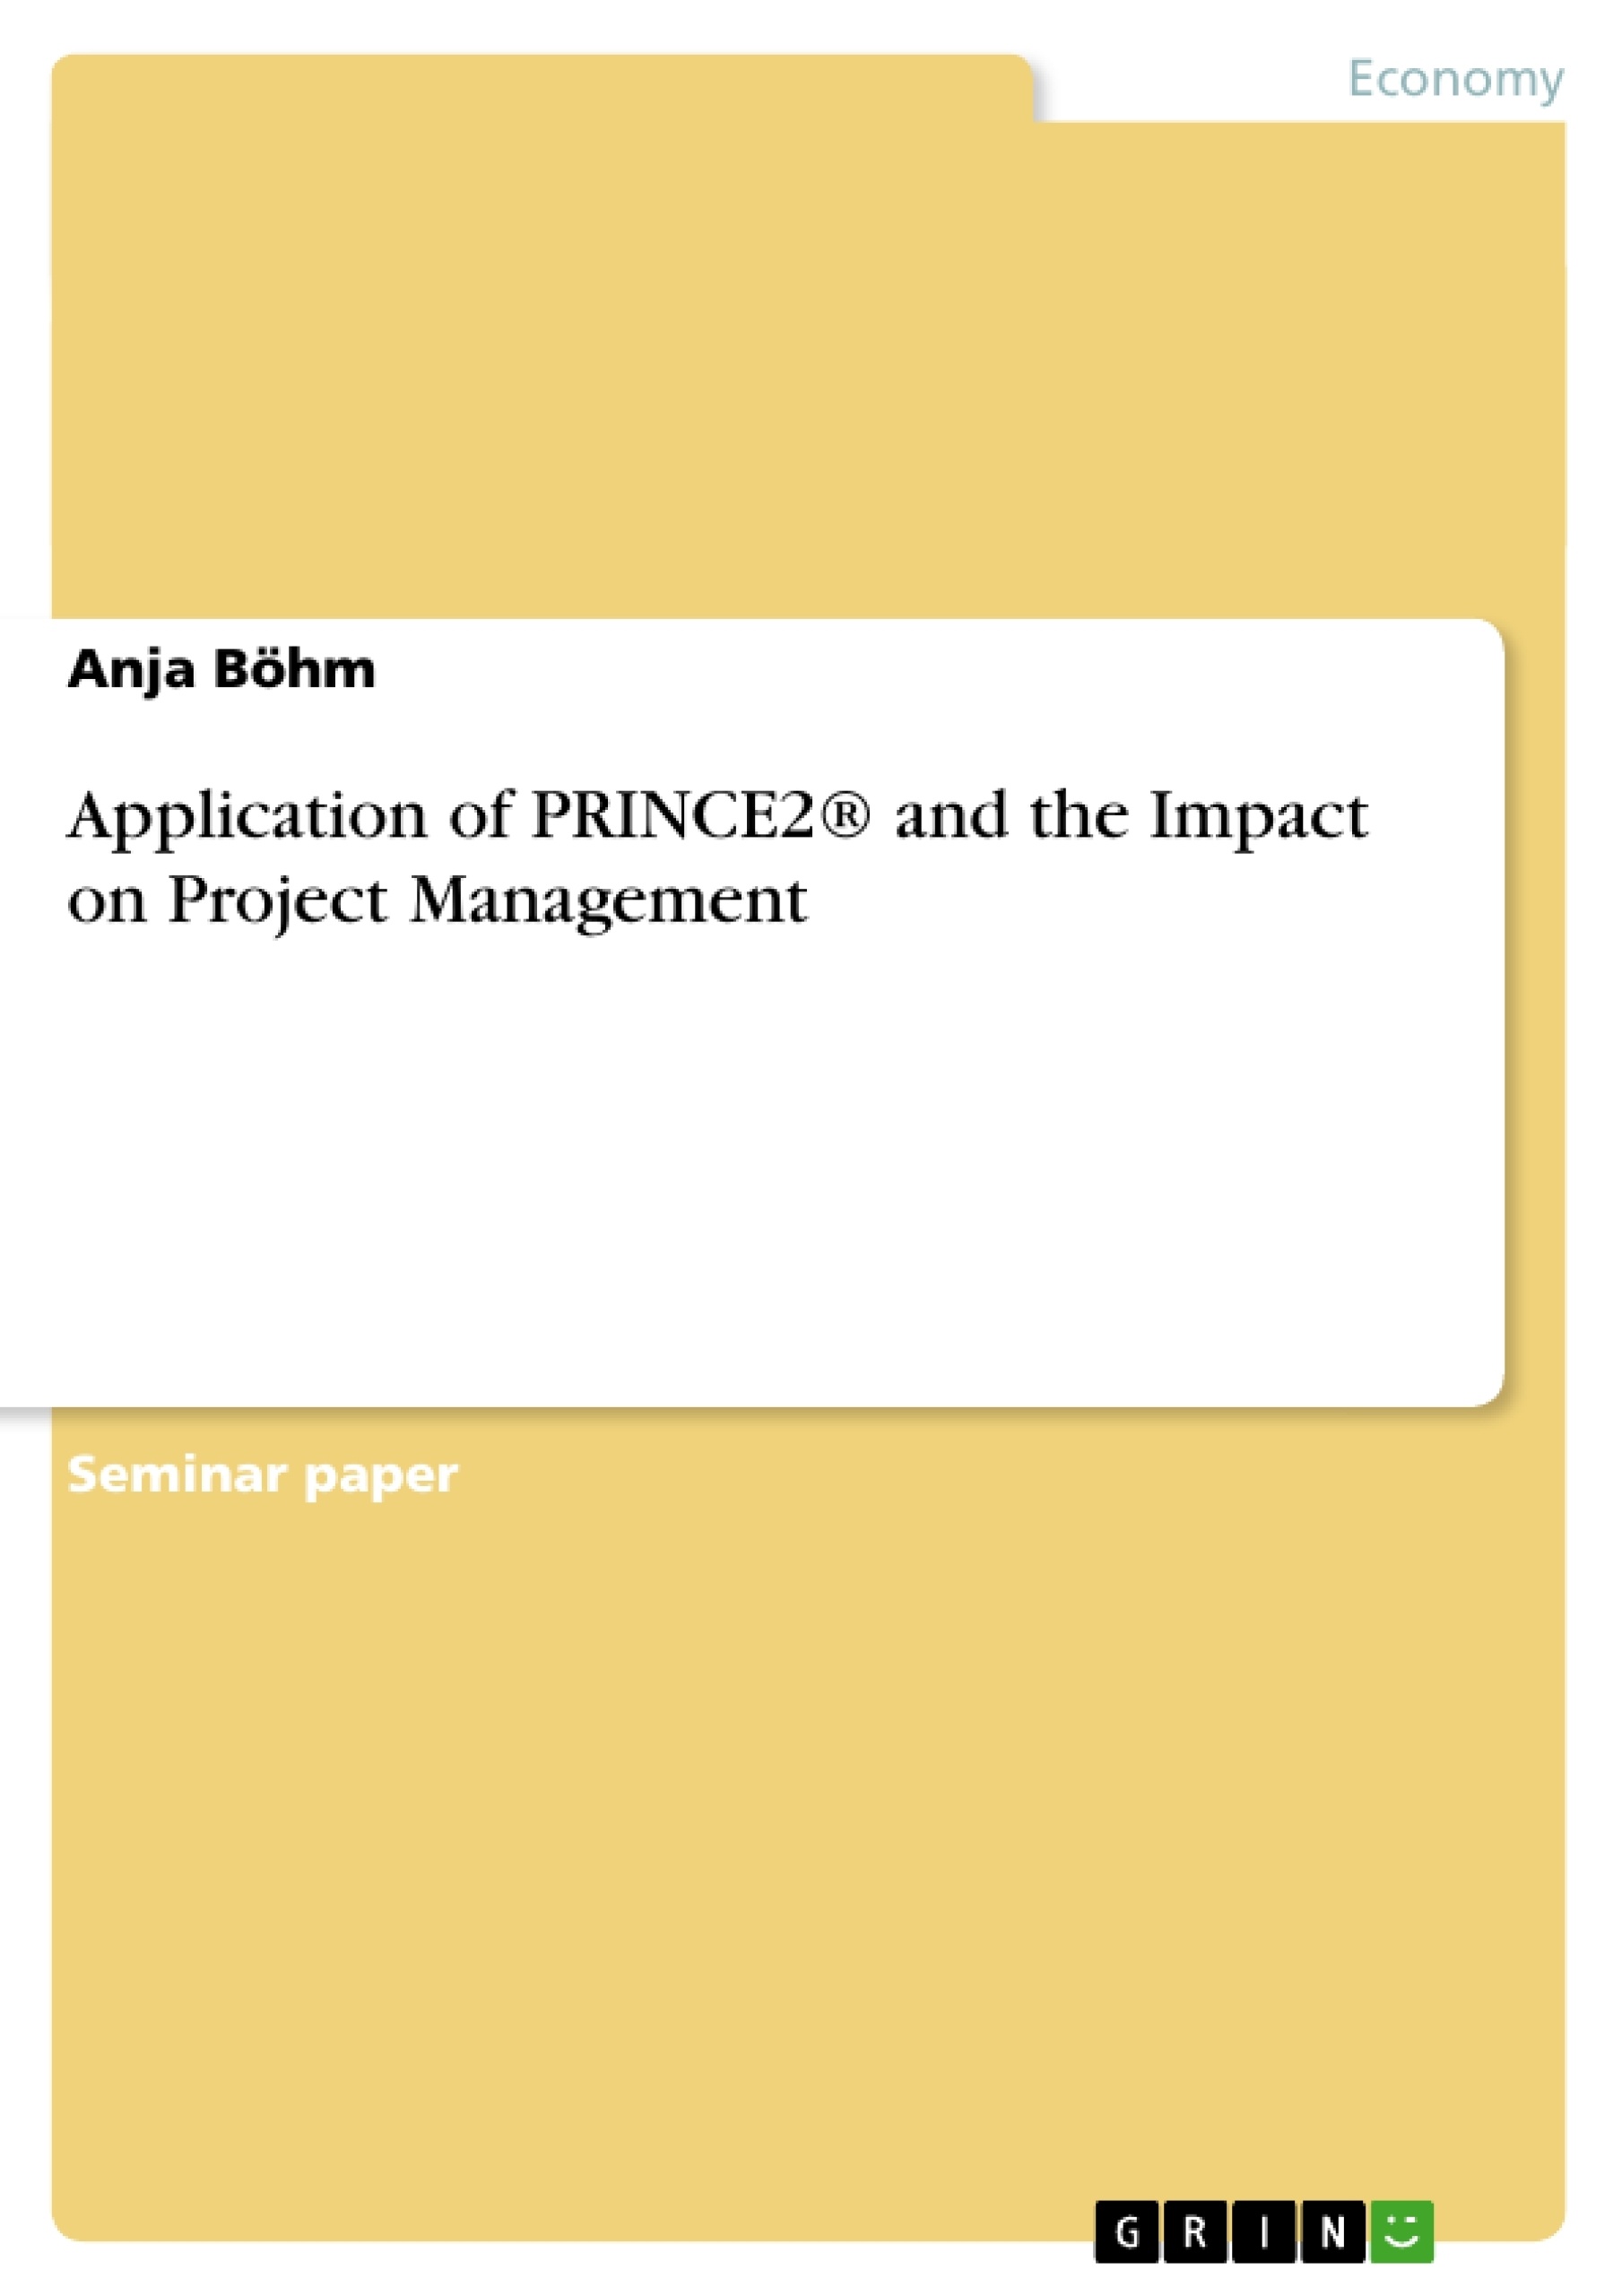 Title: Application of PRINCE2® and the Impact on Project Management